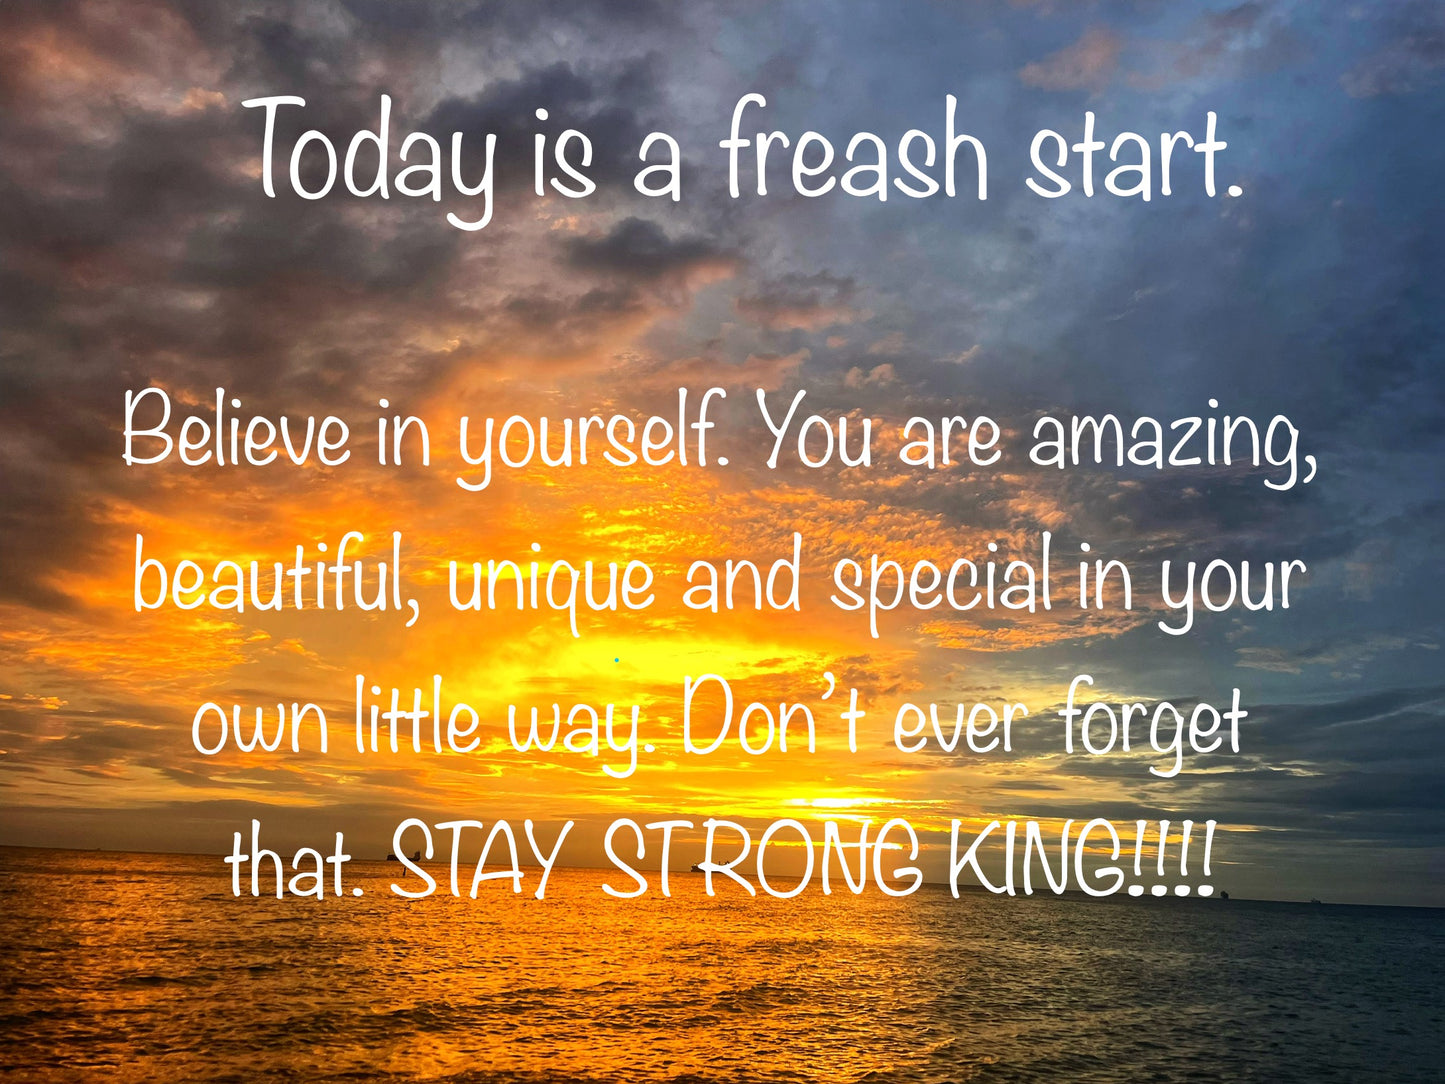 Today is a fresh start